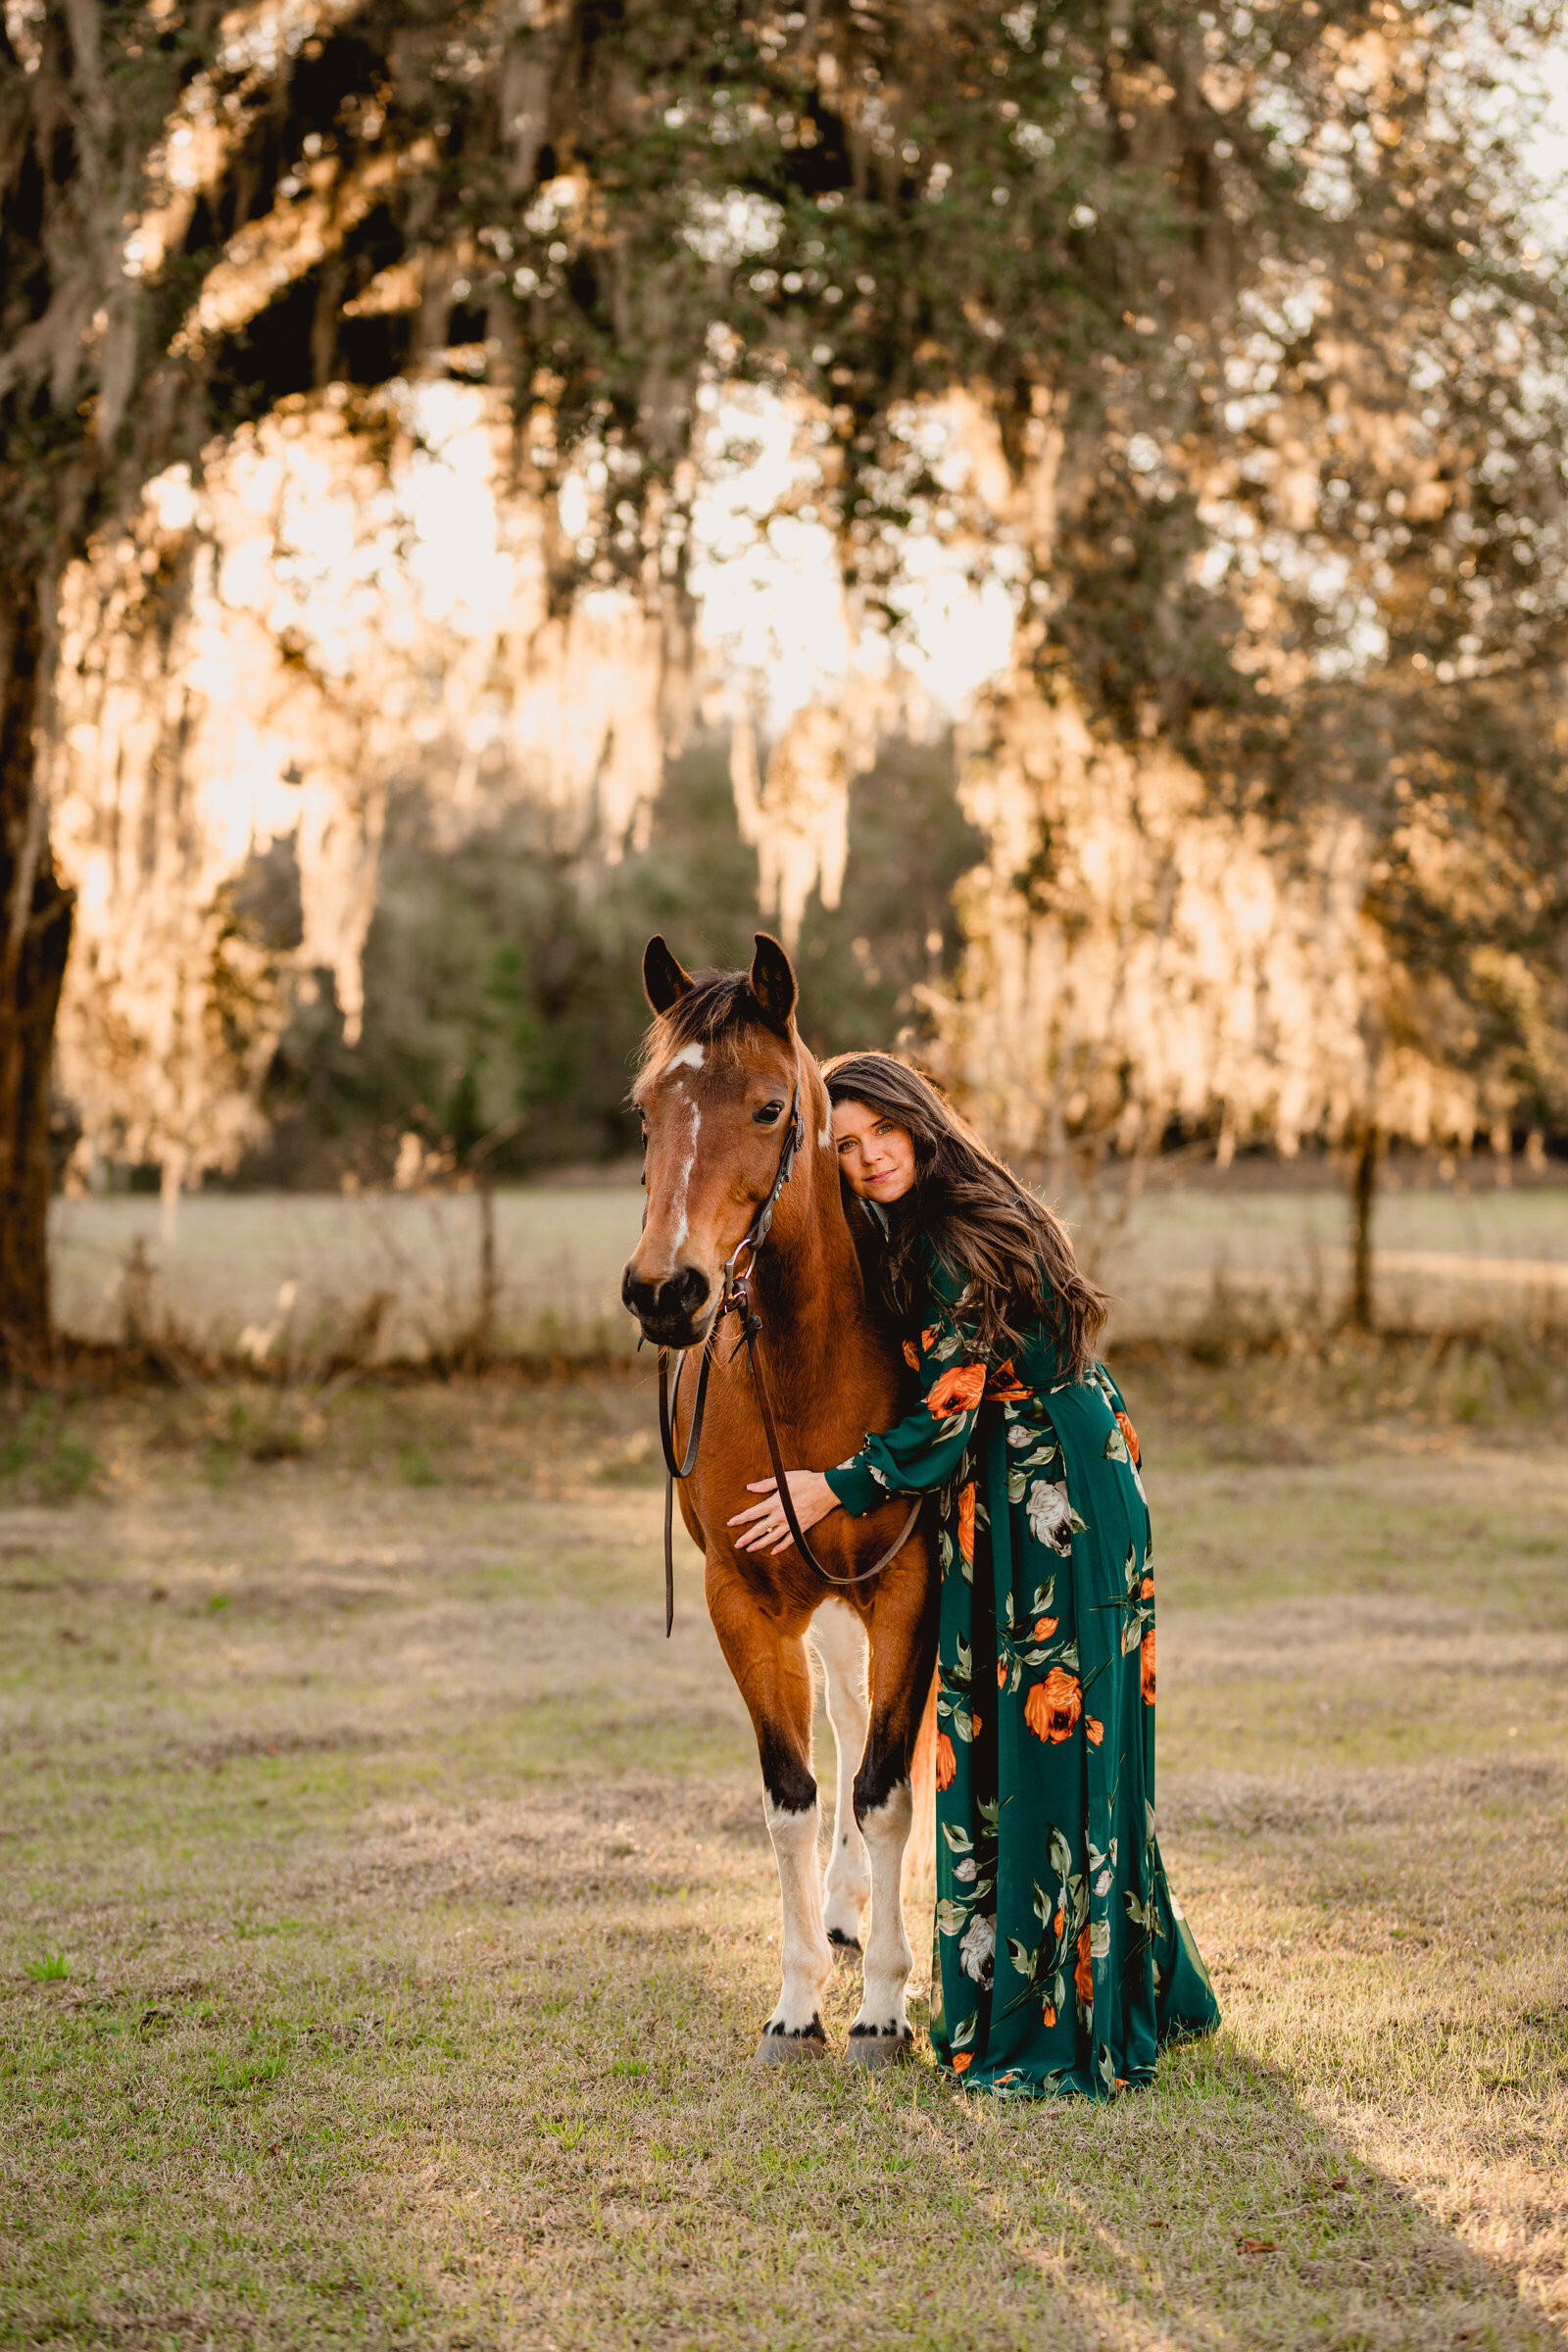 Woman with her paint mare under an Oak tree at sunset in Tallahassee, FL.